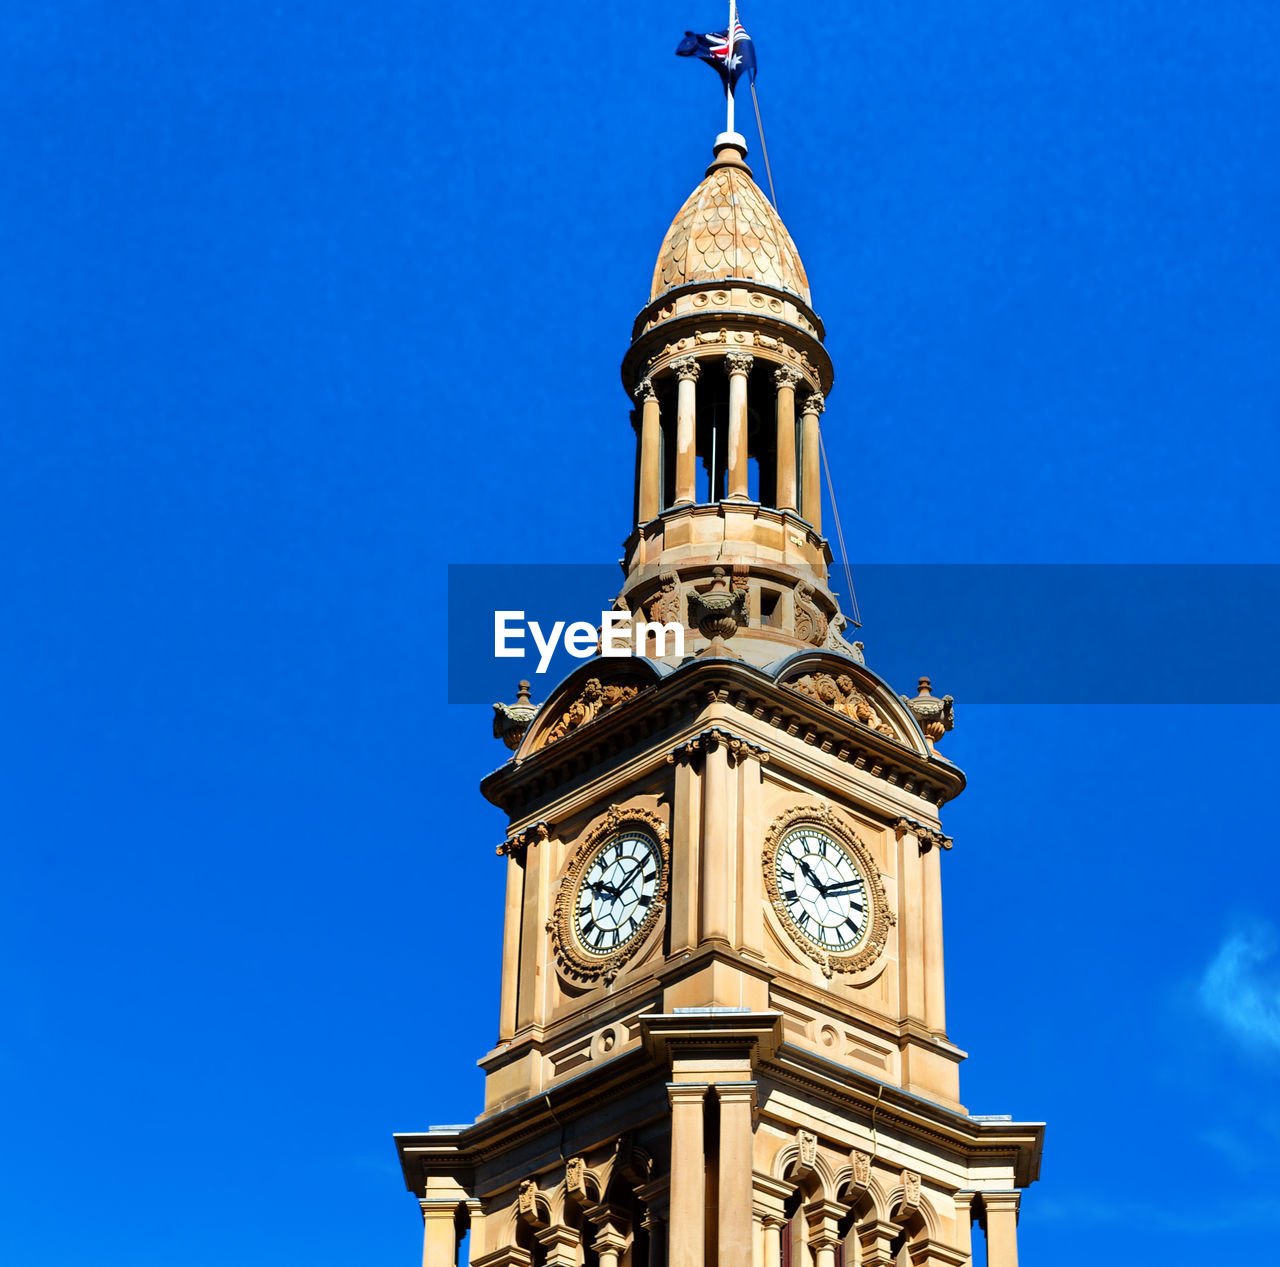 LOW ANGLE VIEW OF CLOCK TOWER AGAINST BLUE SKY AND BUILDING